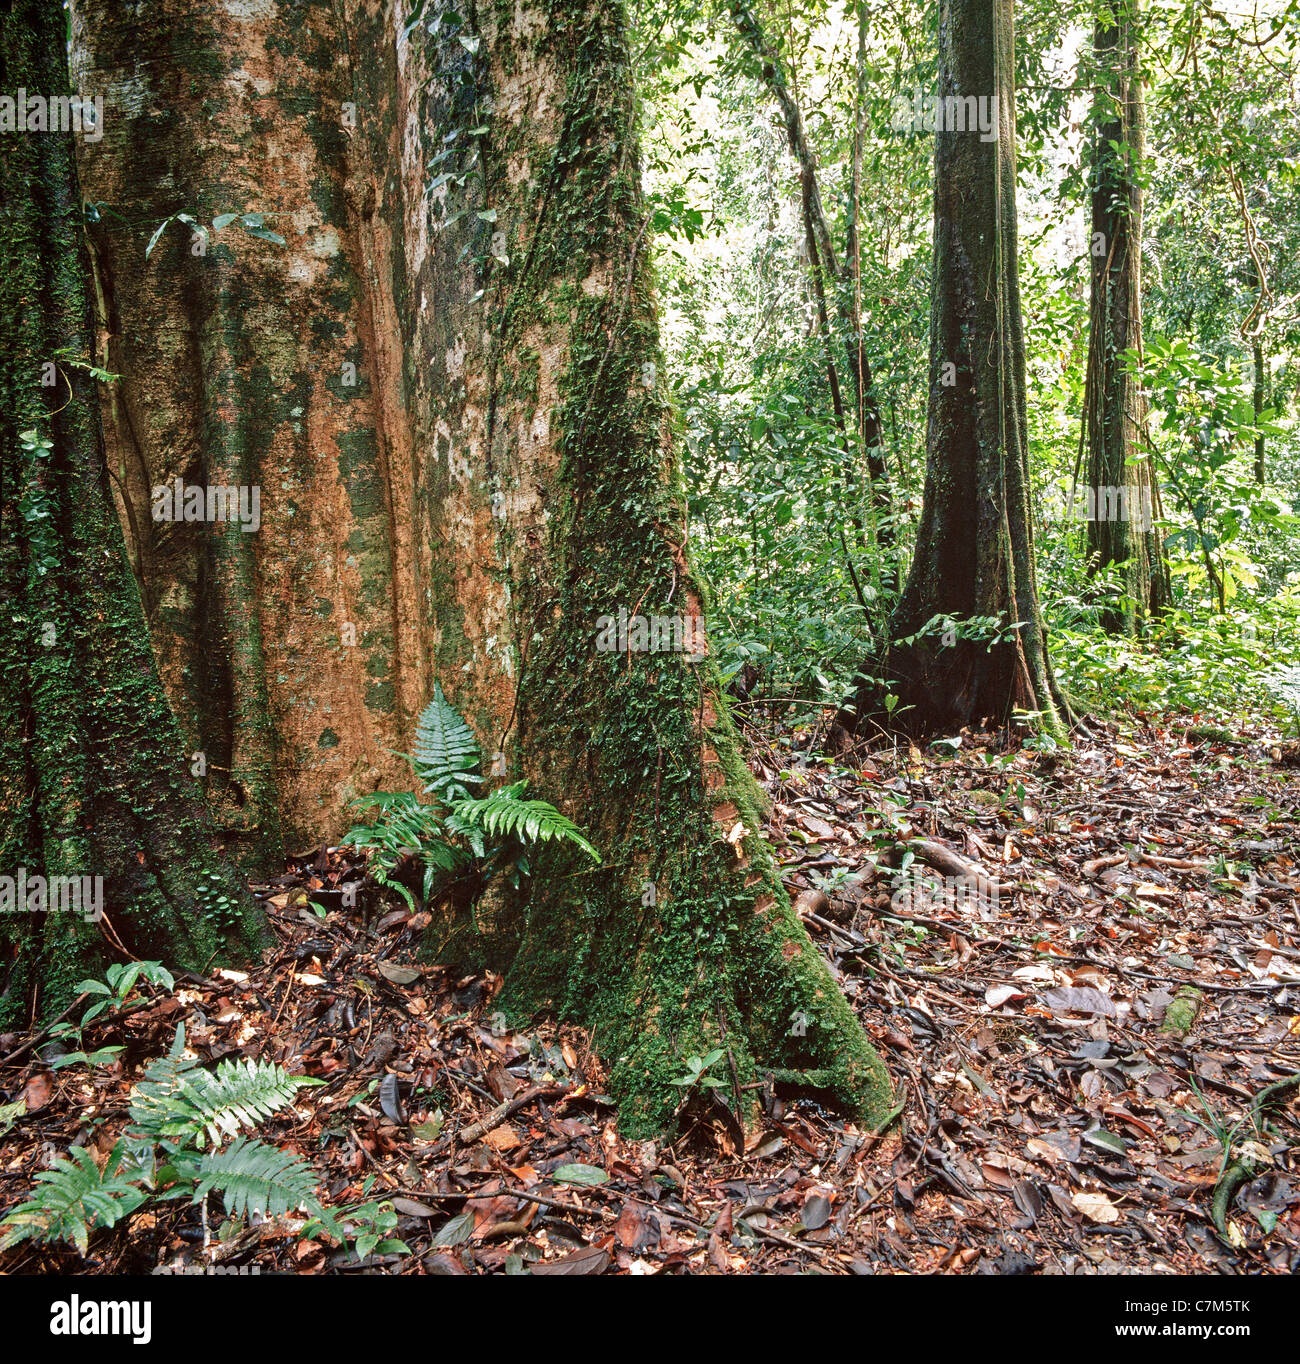 Mulu National Park, Sarawak, Borneo, East Malaysia, aerial roots of hardwood trees, buttress roots, rich undergrowth, floor Stock Photo